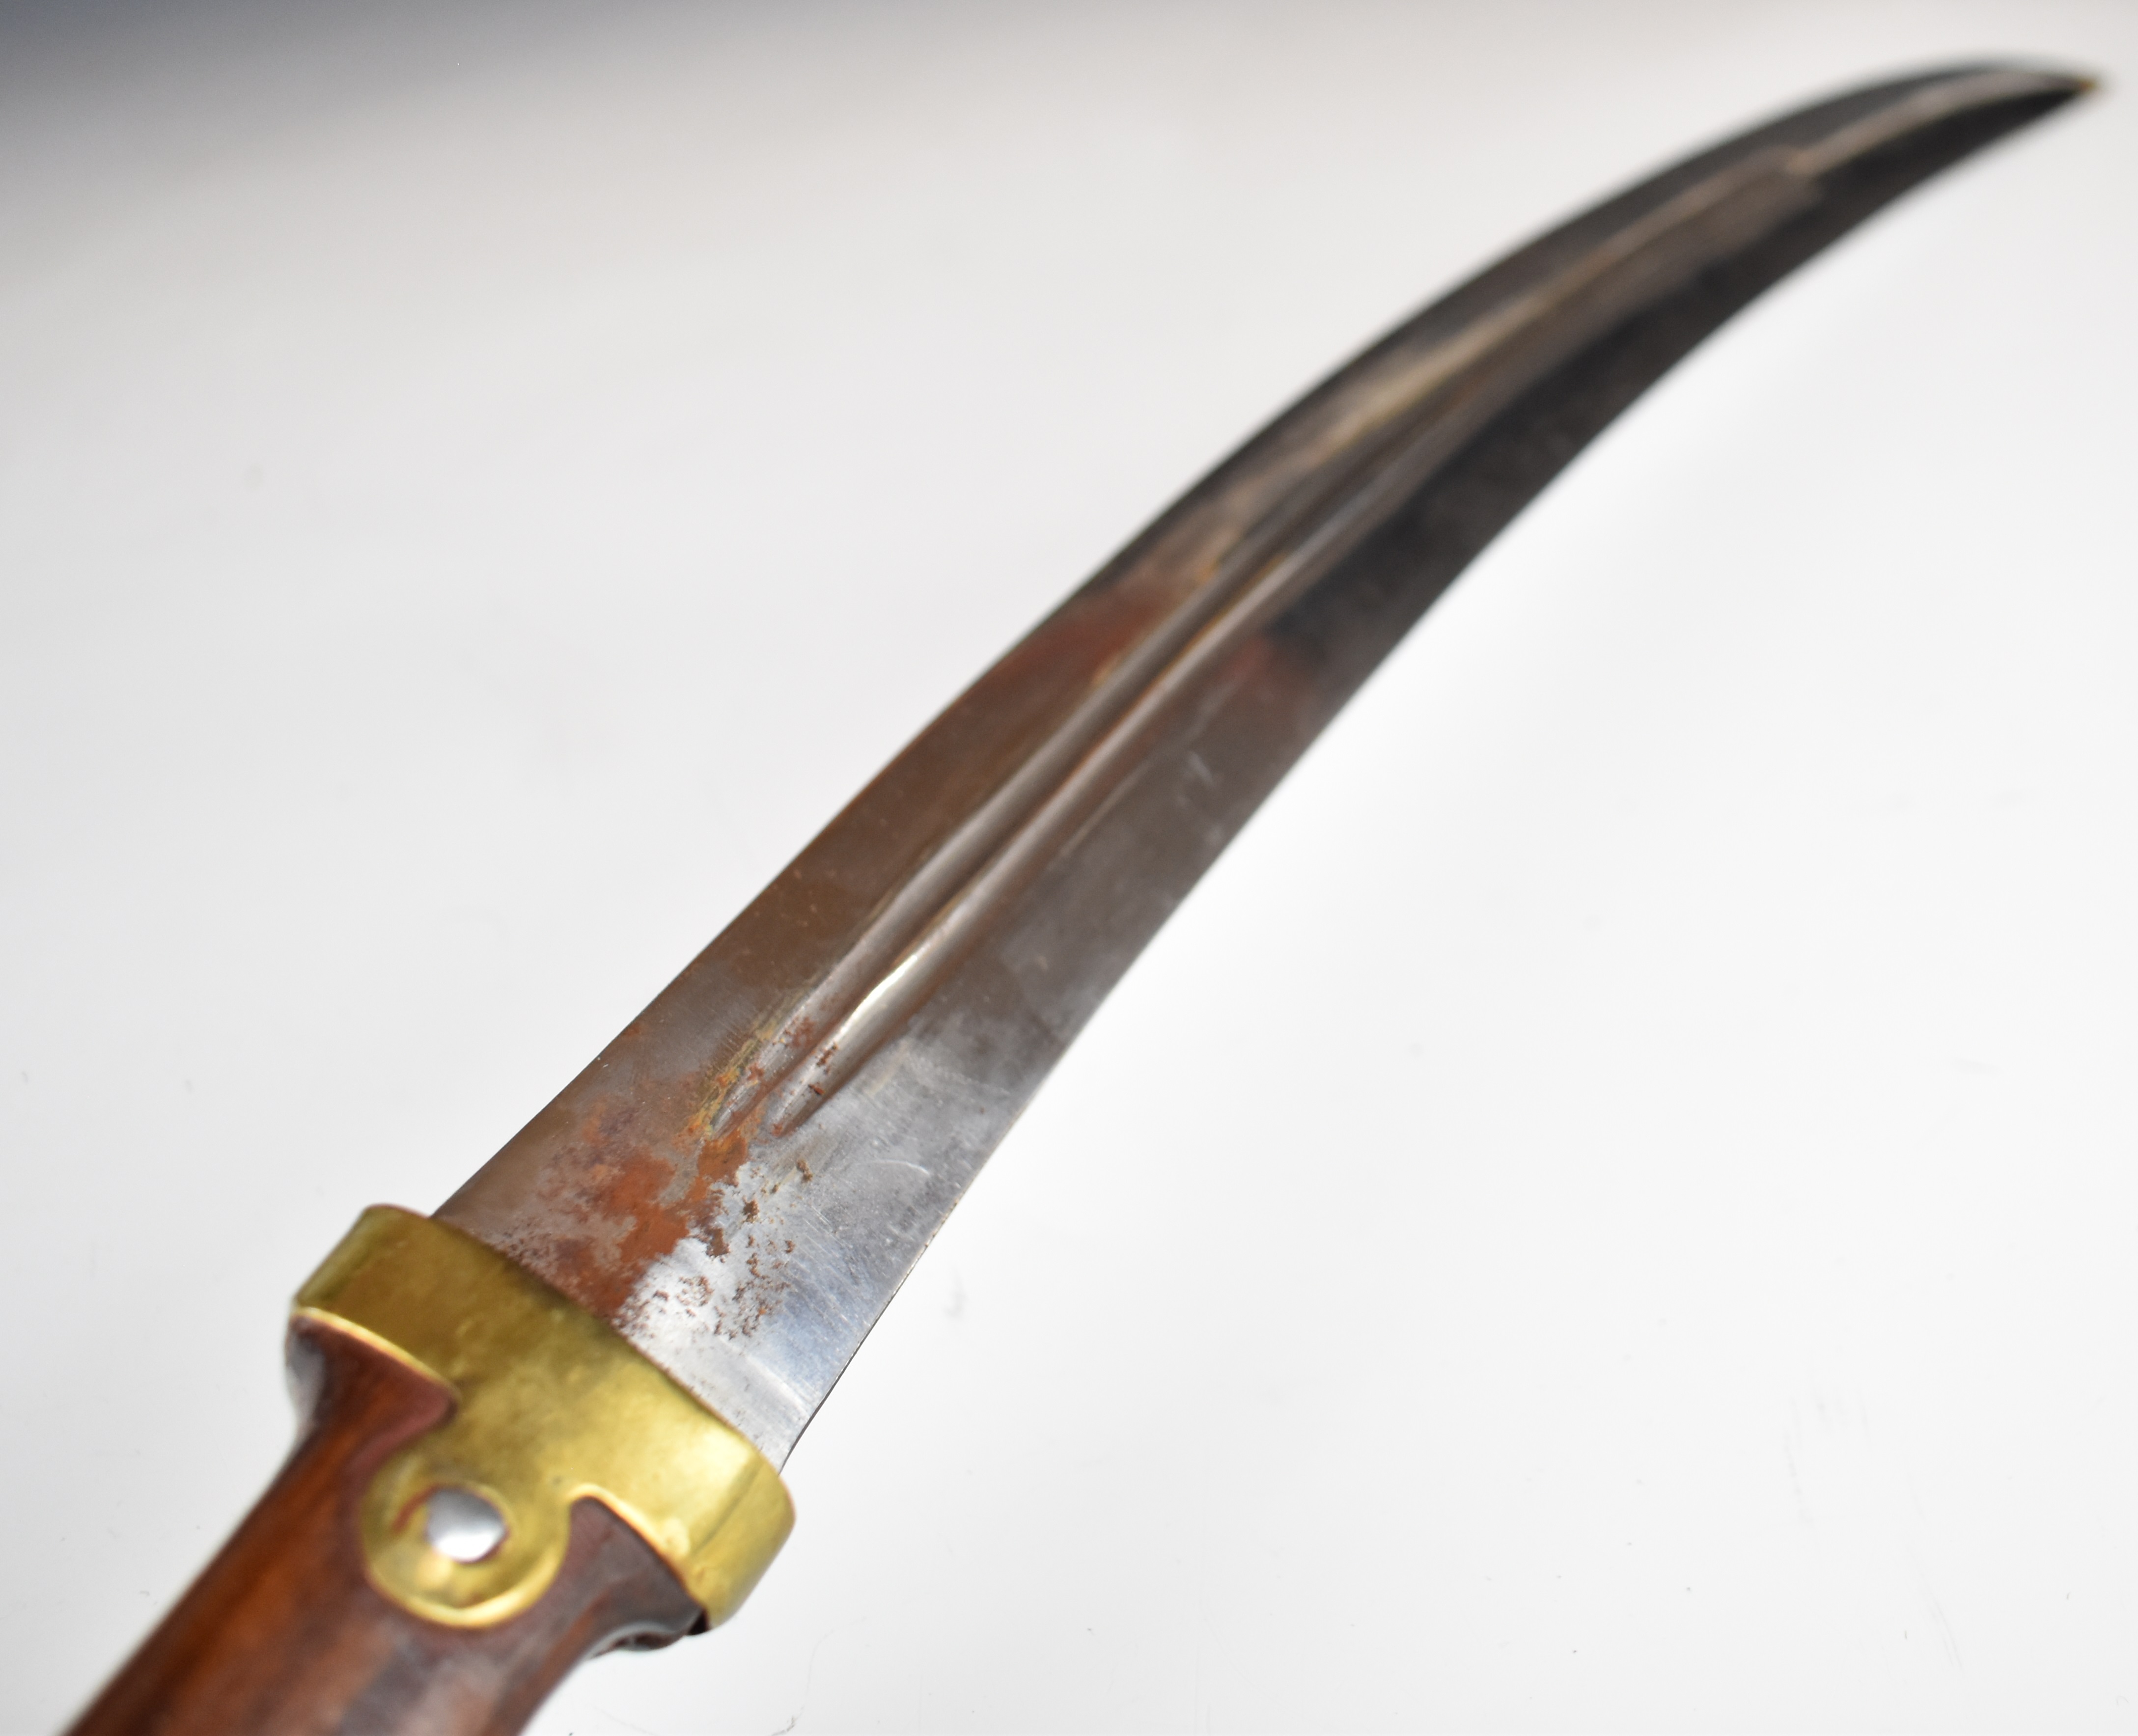 Continental short sword with wooden grips, 44cm double fullered curved blade, leather covered sheath - Image 6 of 6